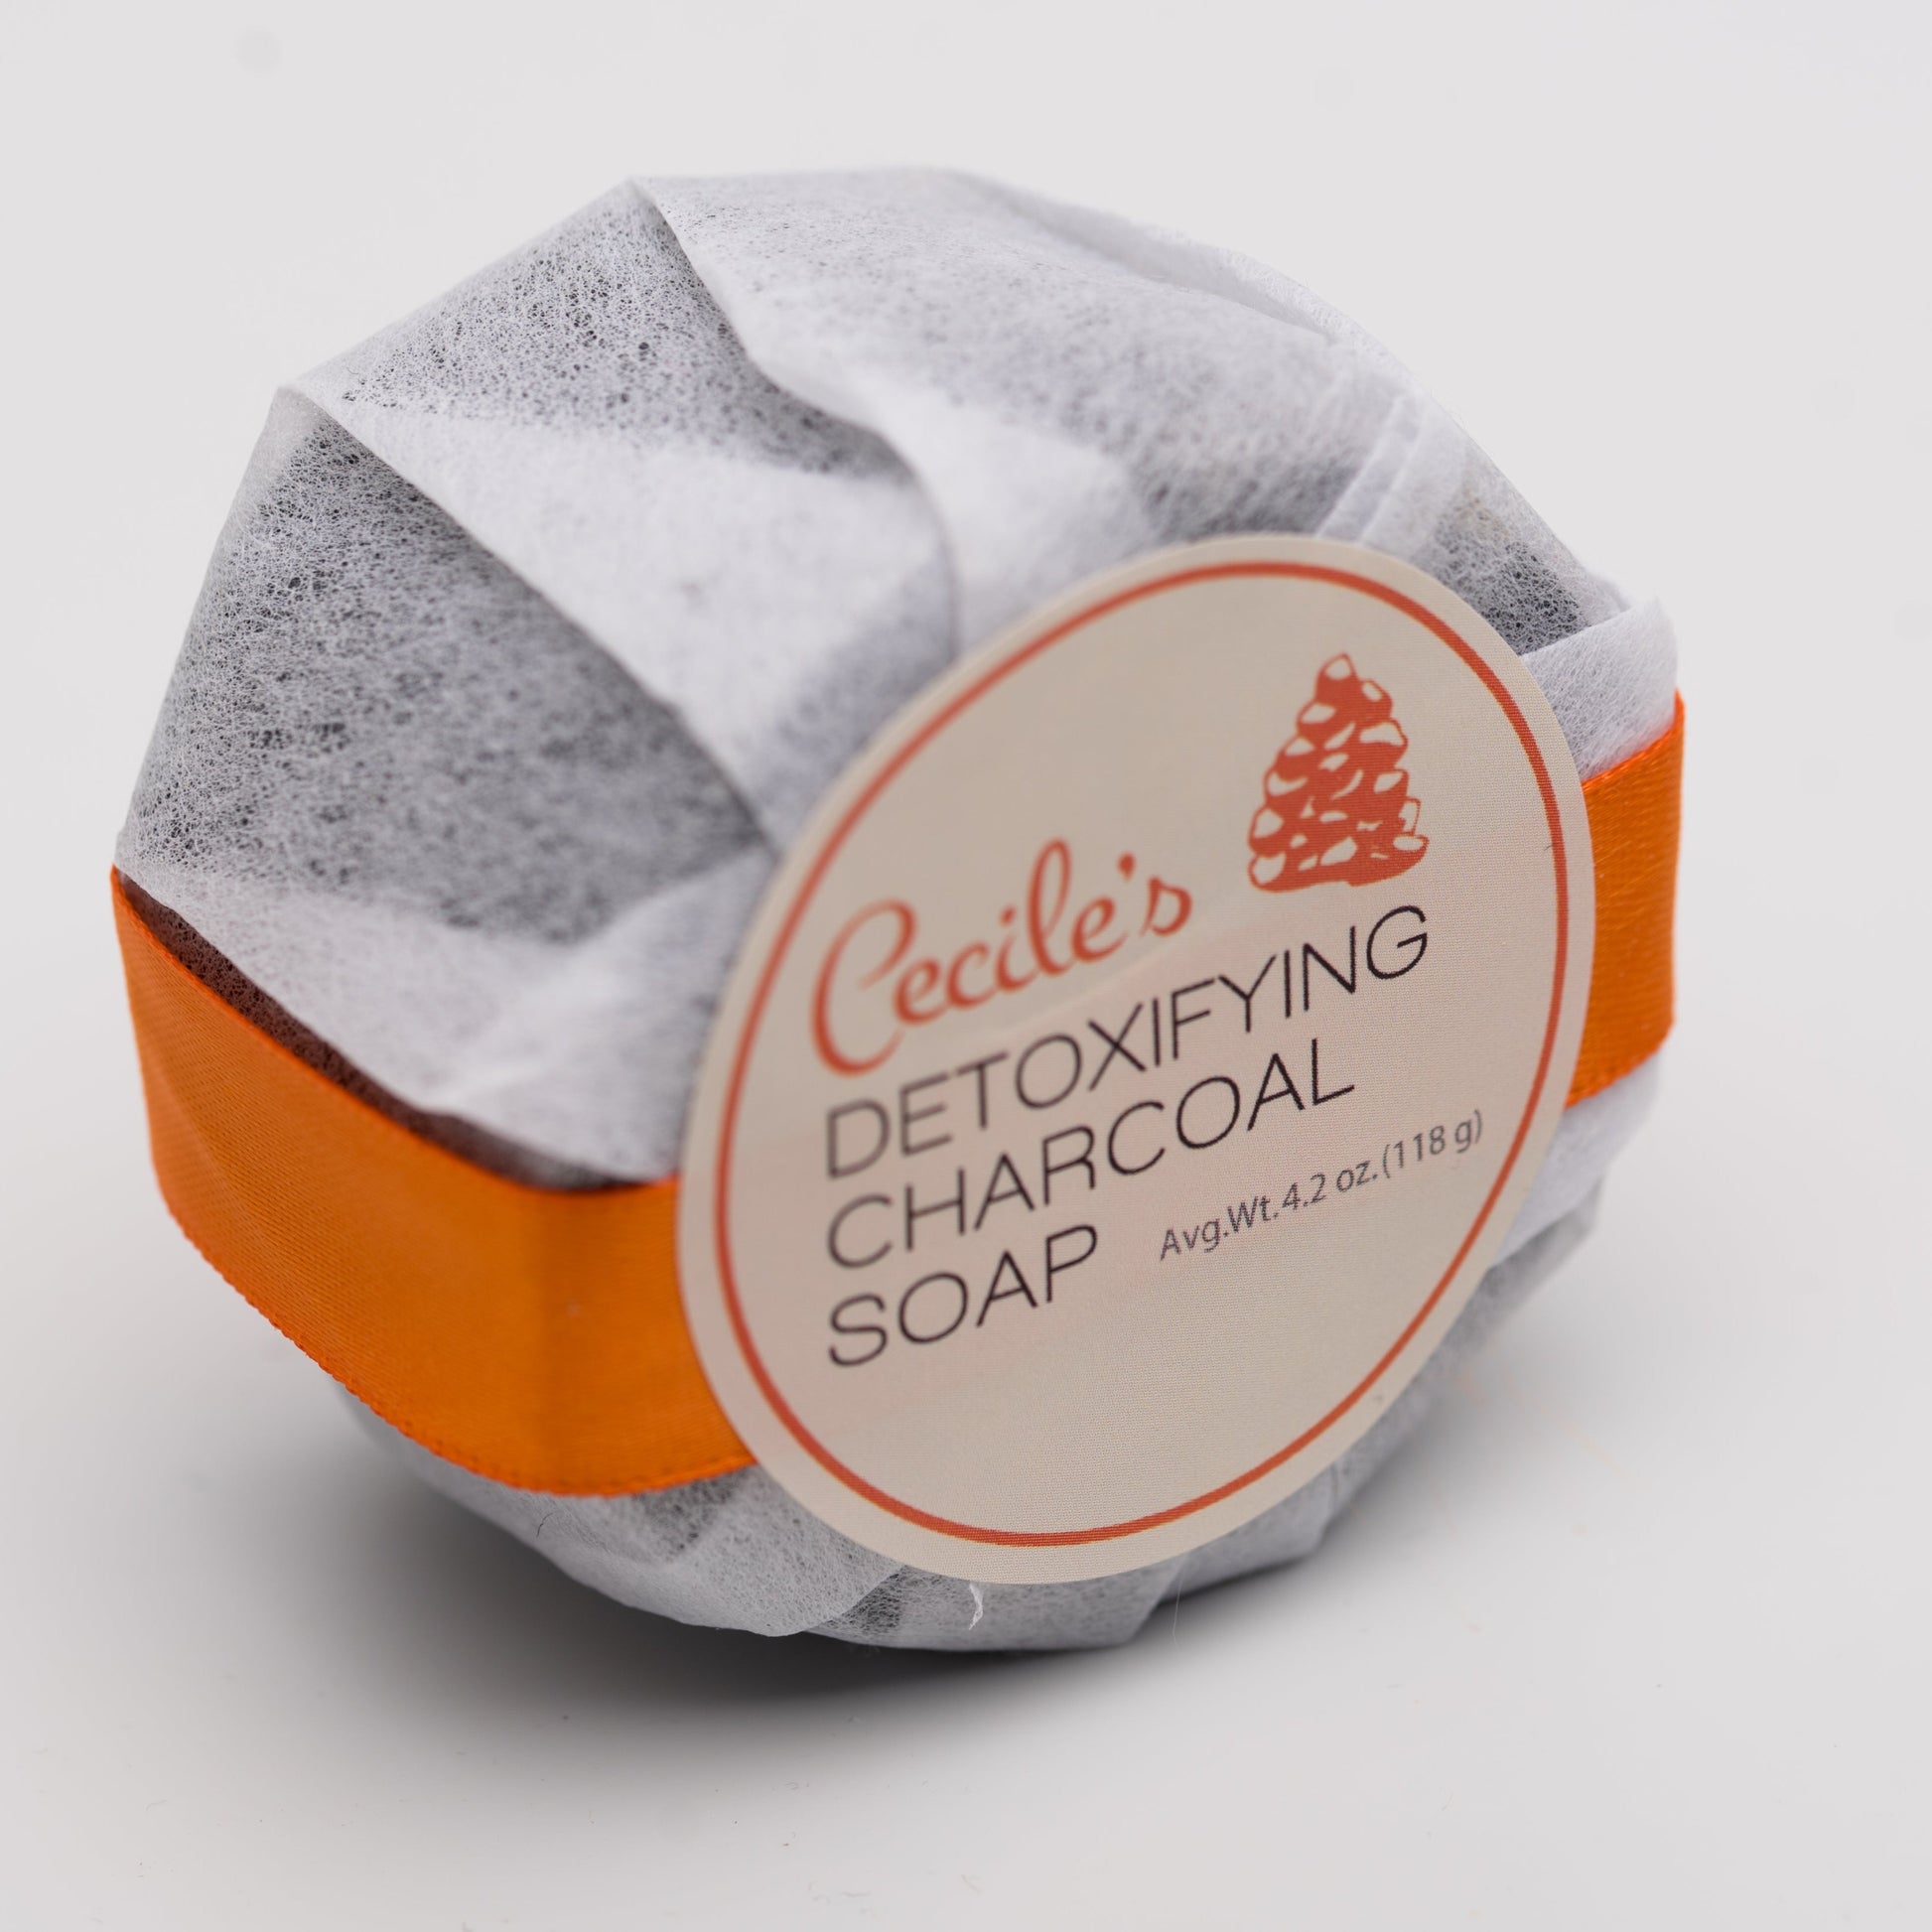 Cecile's #1 best selling soap excellent for dry, mature, and acne-prone skin